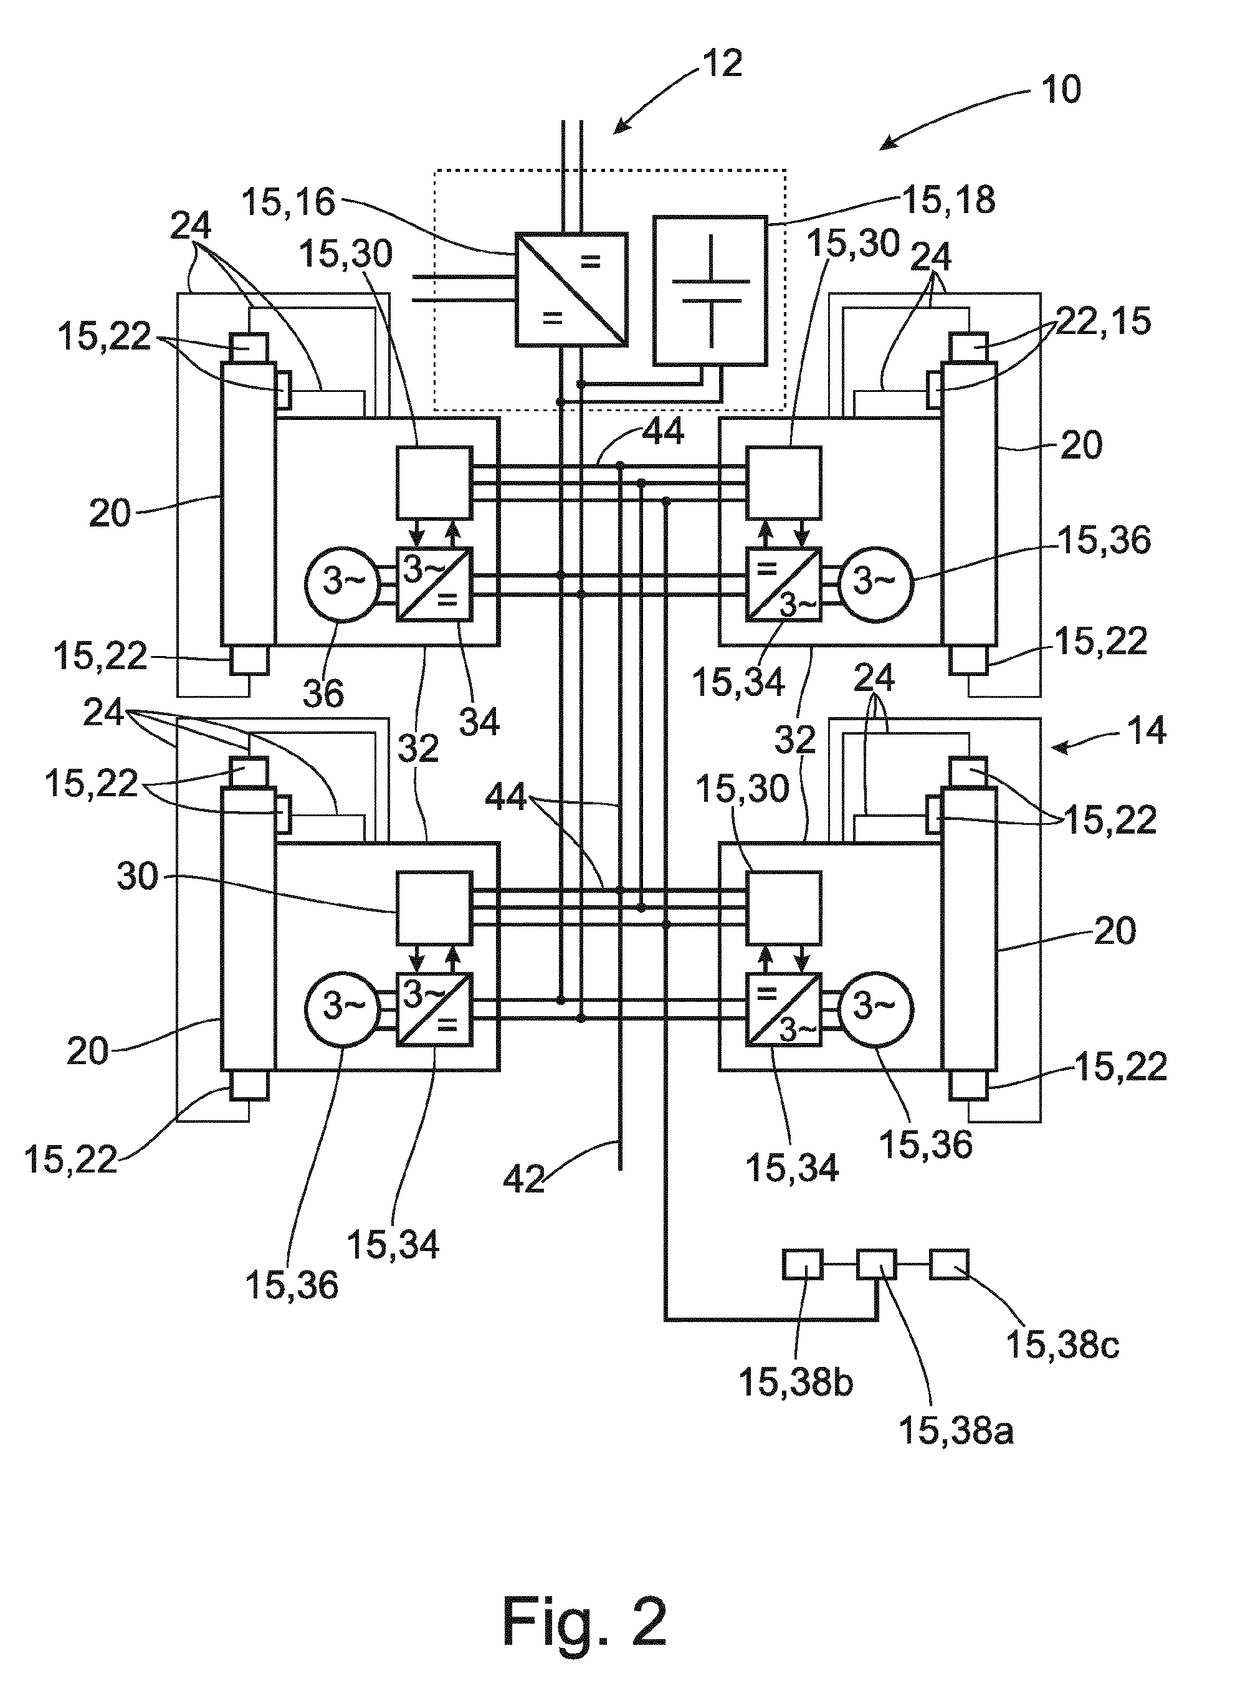 System Architecture For An Active Chassis System On A Motor Vehicle